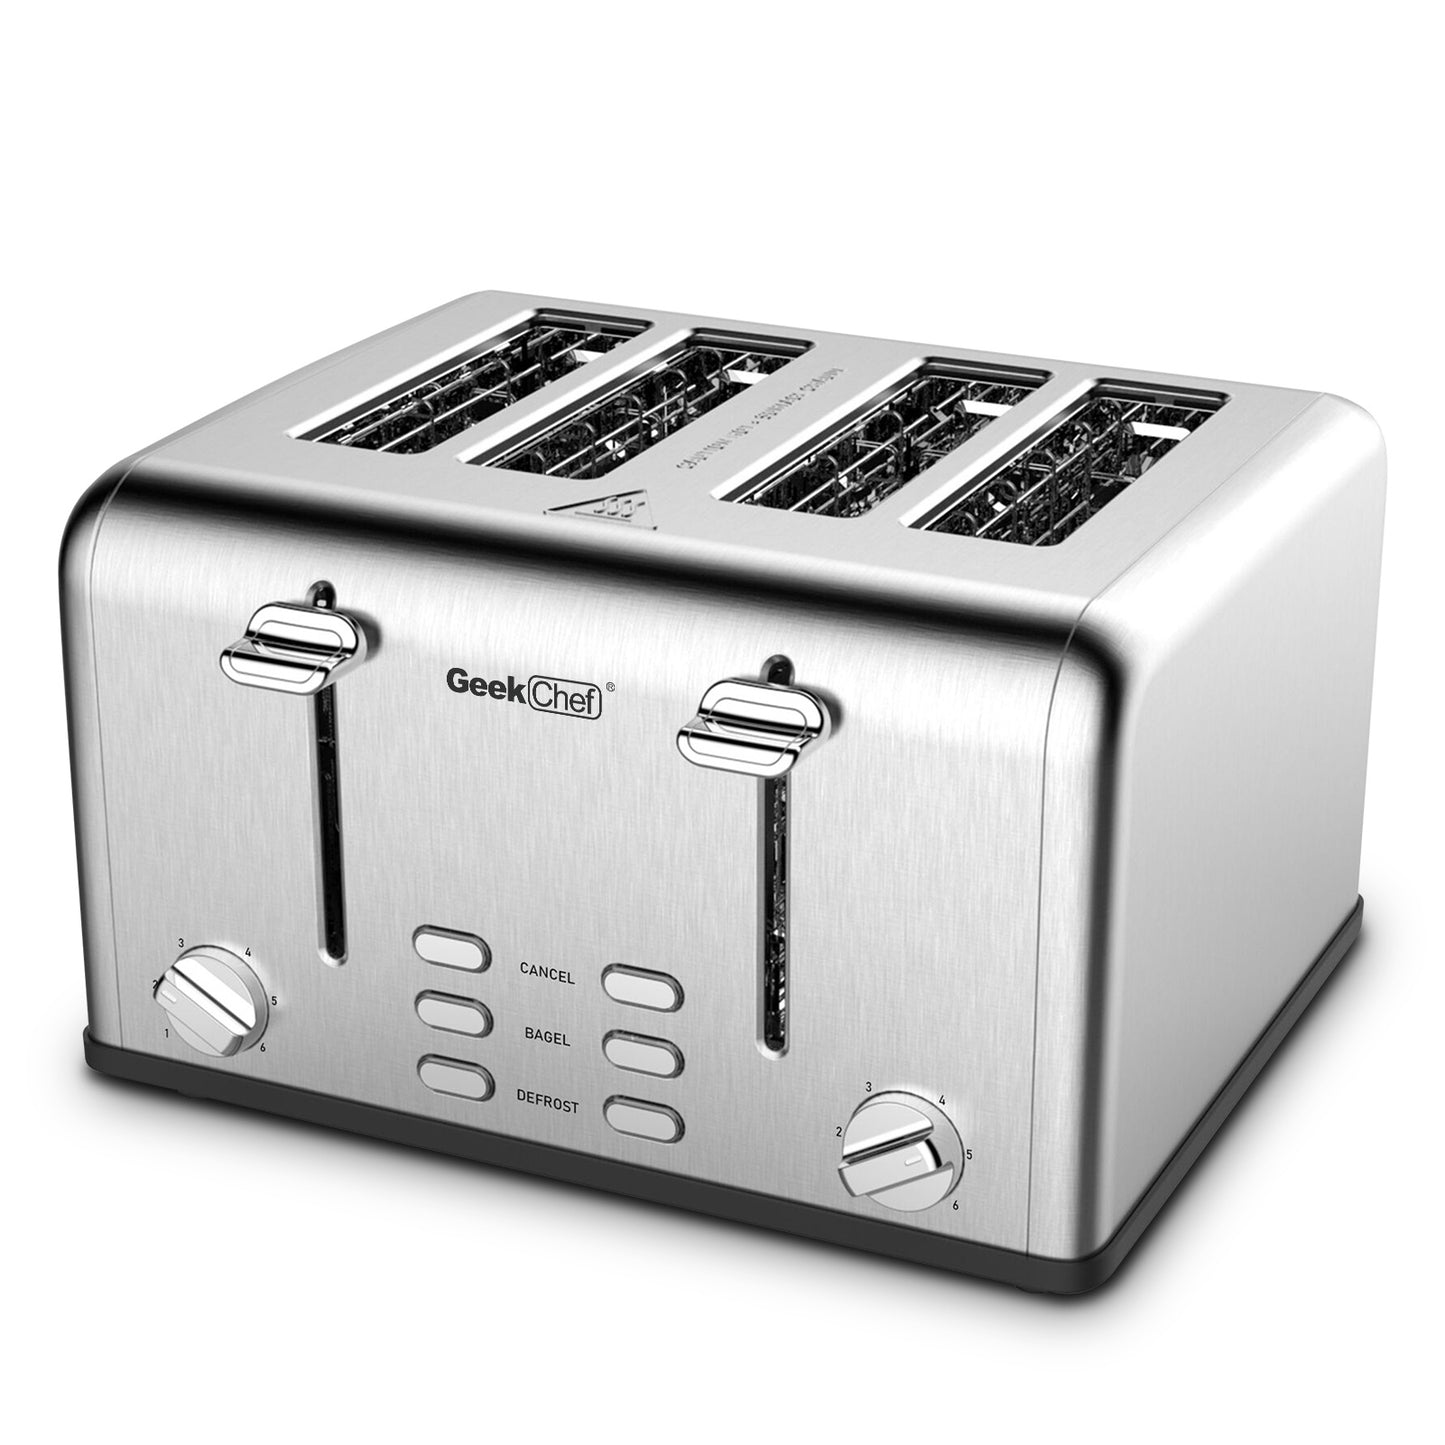 Toaster 4 Slice, Stainless Steel Extra-Wide Slot Toaster with Dual Control Panels of Bagel/Defrost/Cancel Function, 6 Toasting Bread Shade Settings, Removable Crumb Trays, Auto Pop-Up